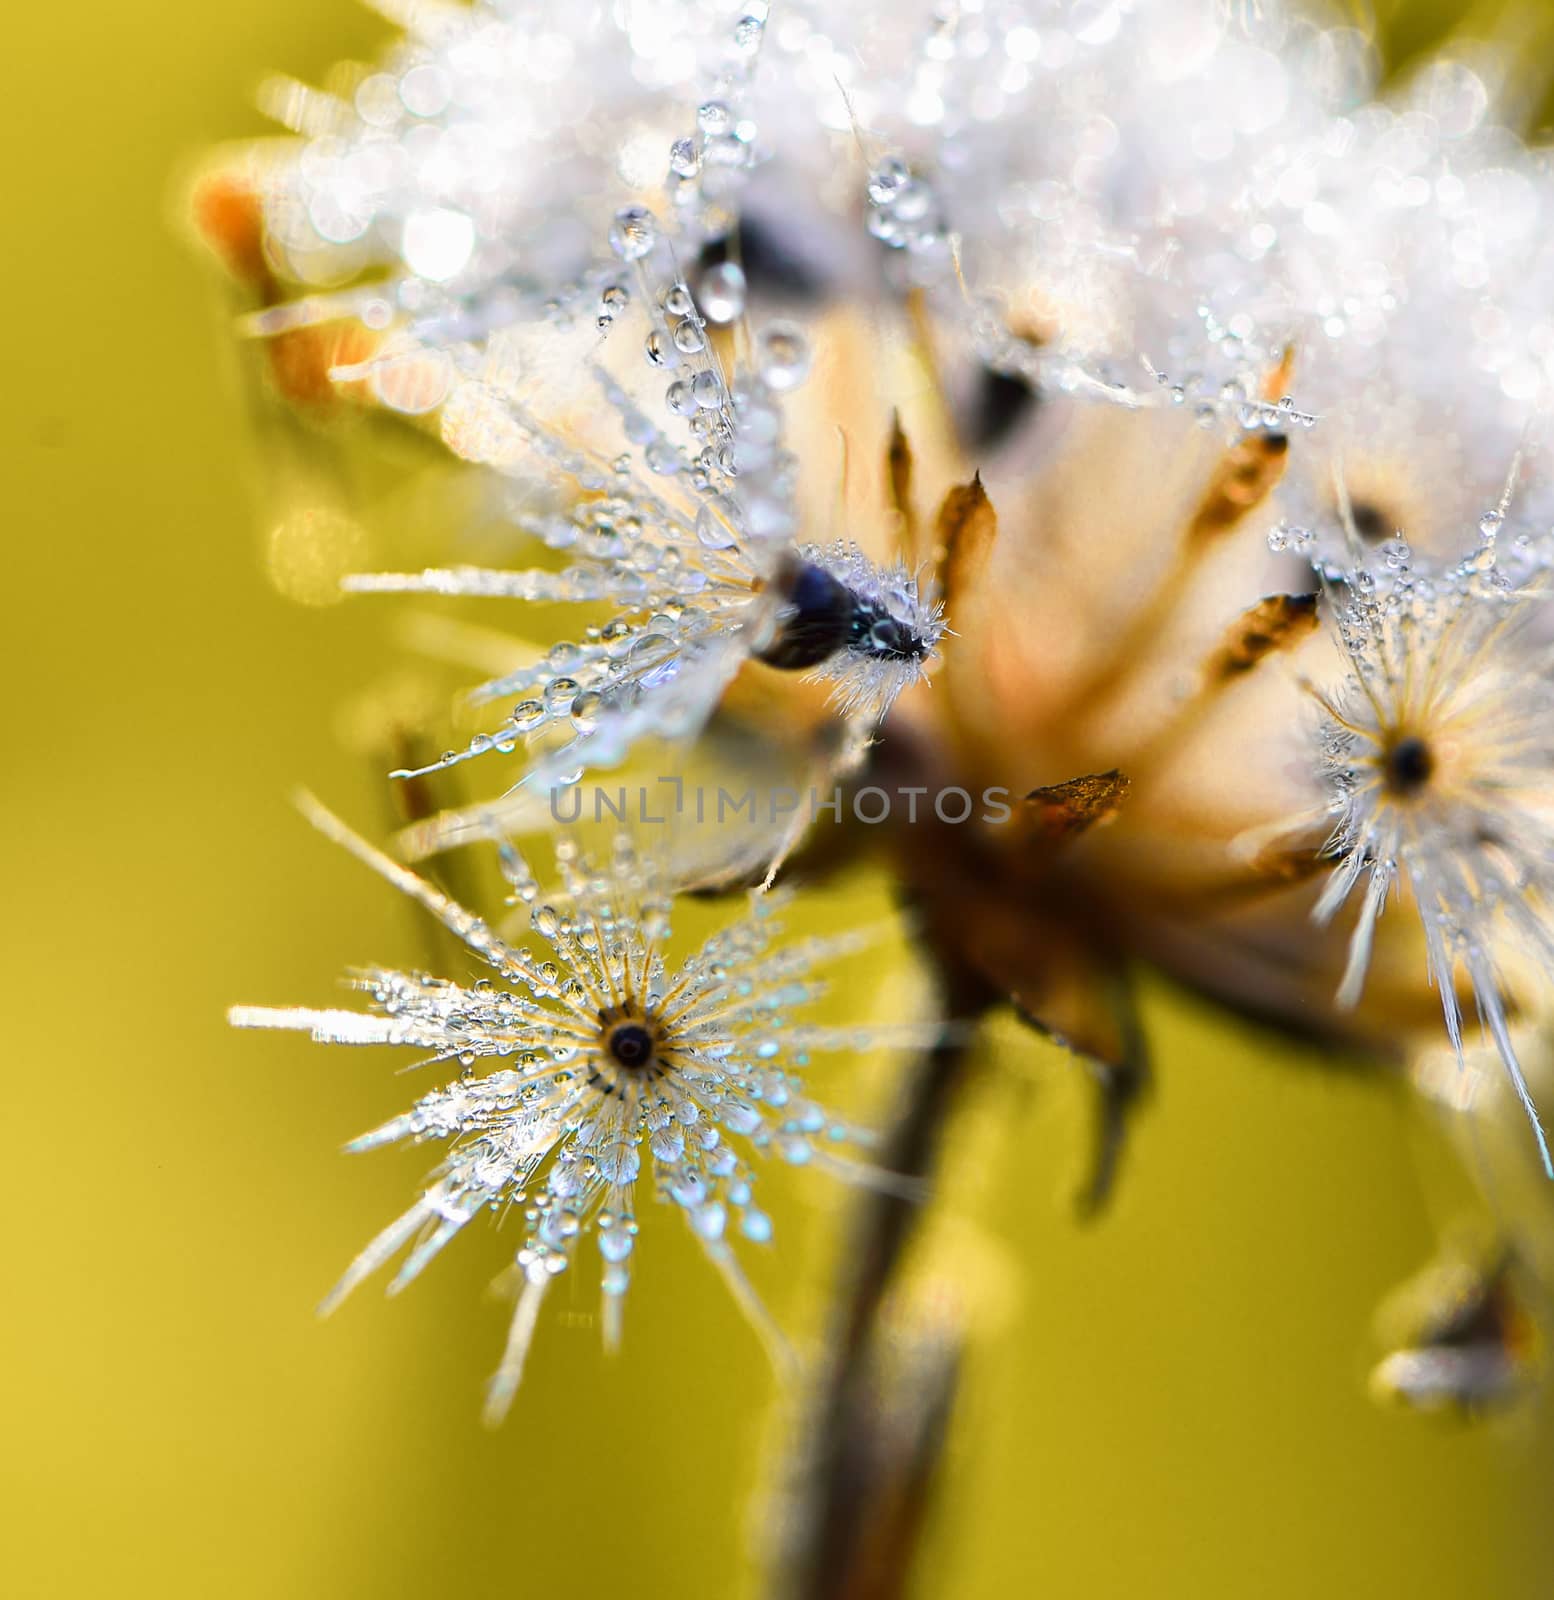 Dew drops on flowers grass in the morning